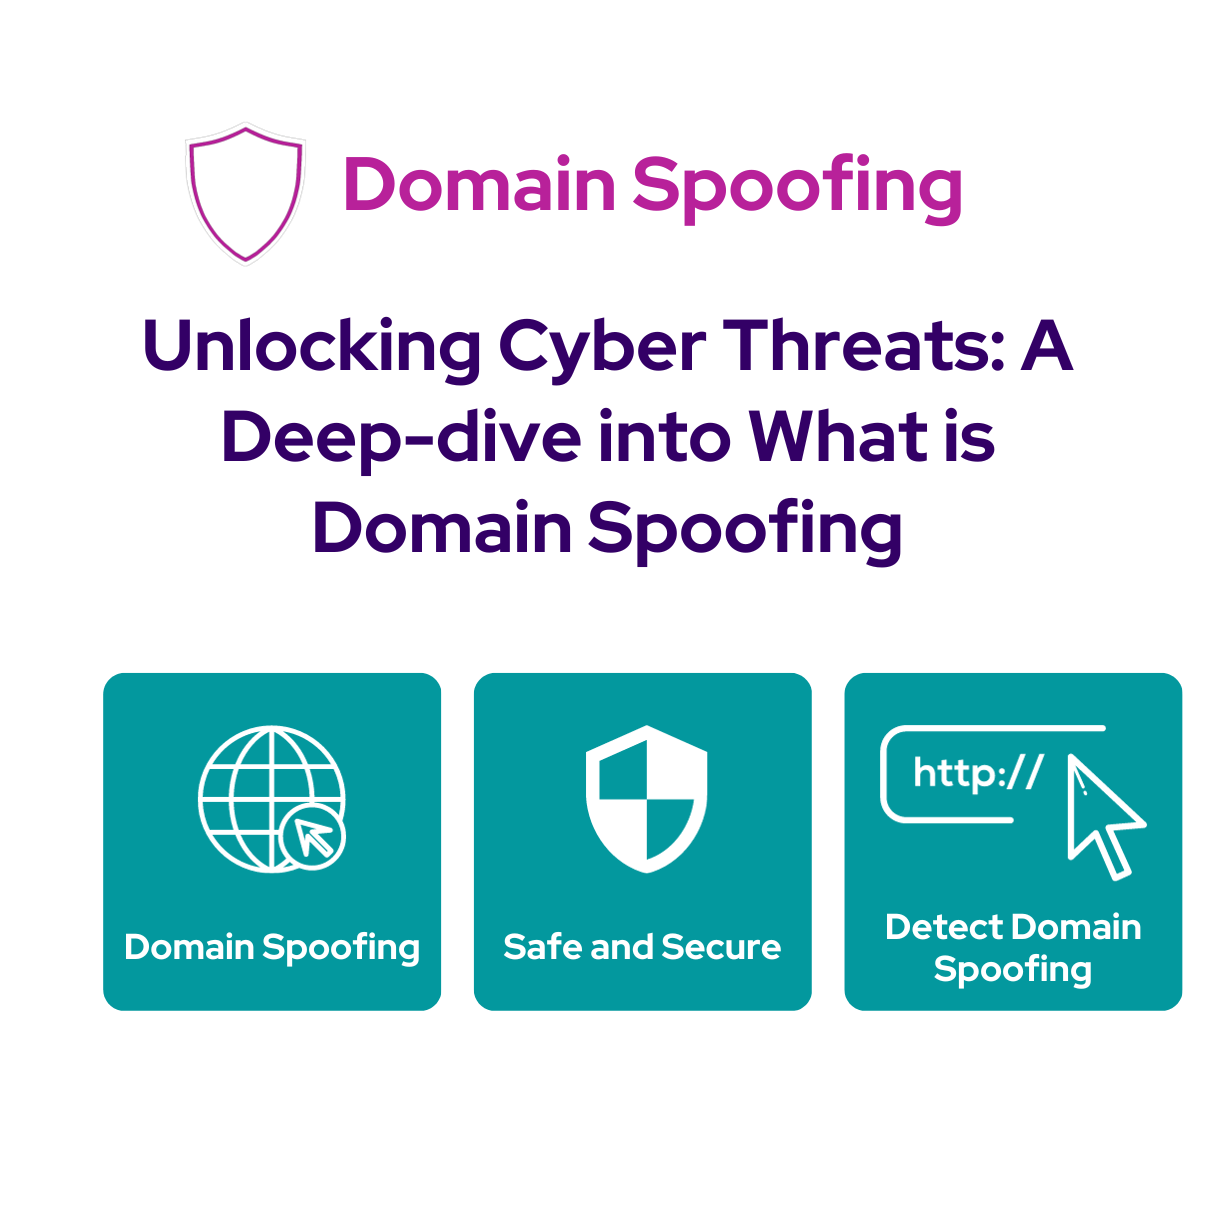 Unlocking Cyber Threats: A Deep-dive into What is Domain Spoofing